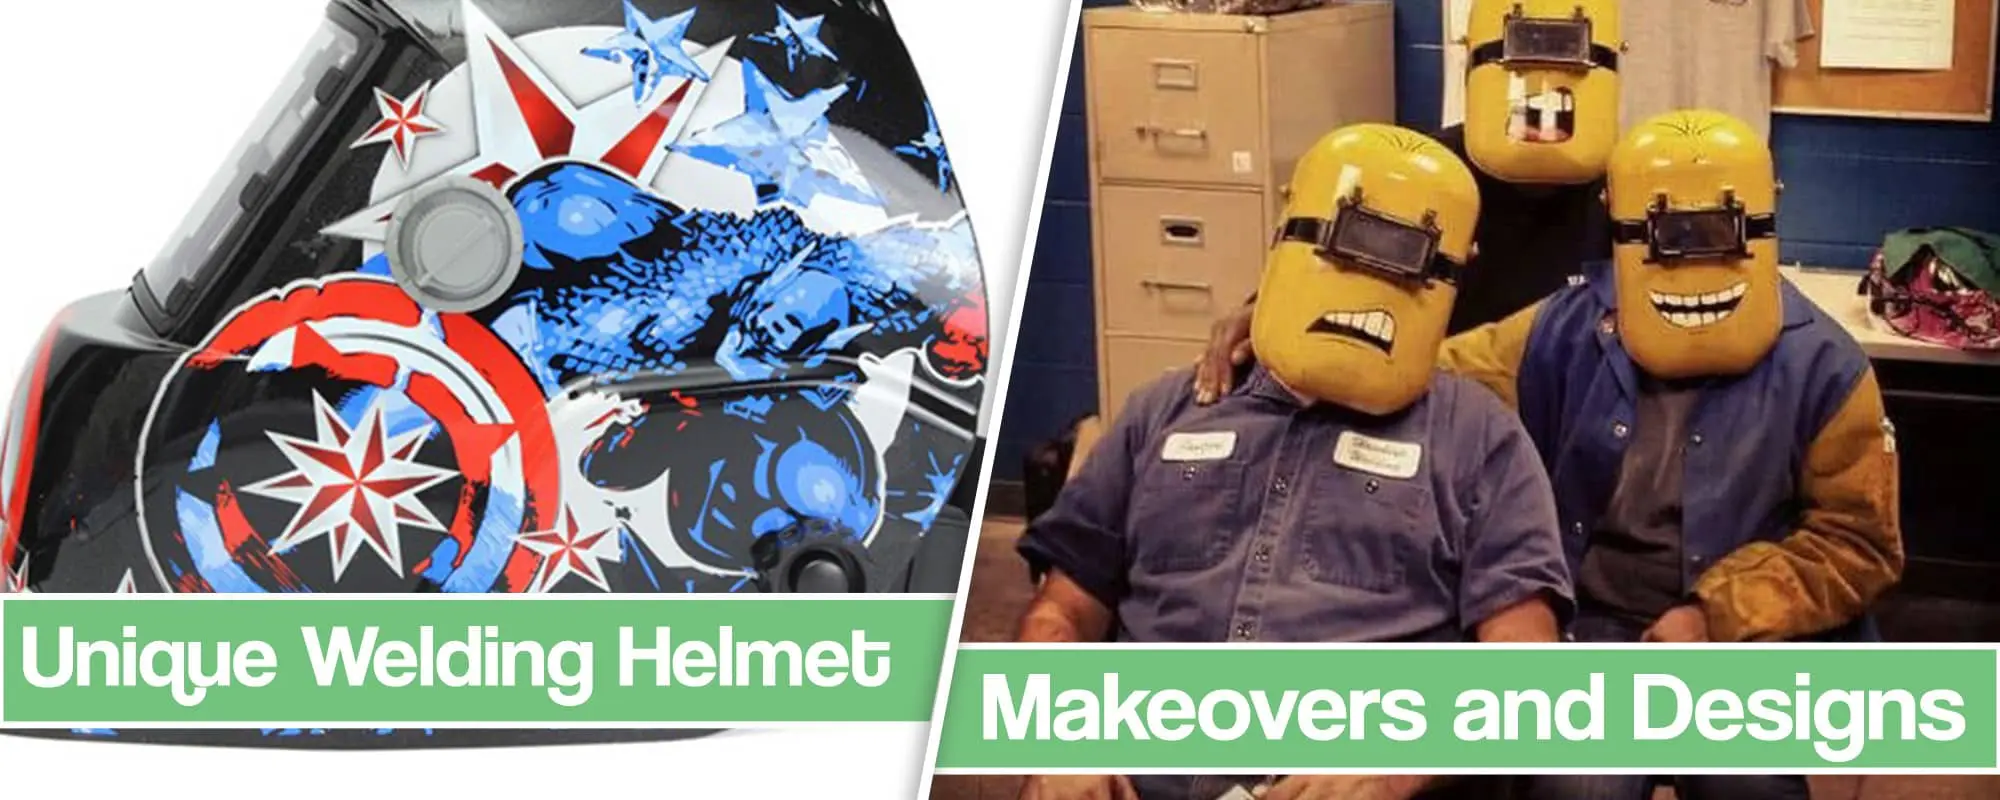 Feature image for Welding Helmet Makeovers article